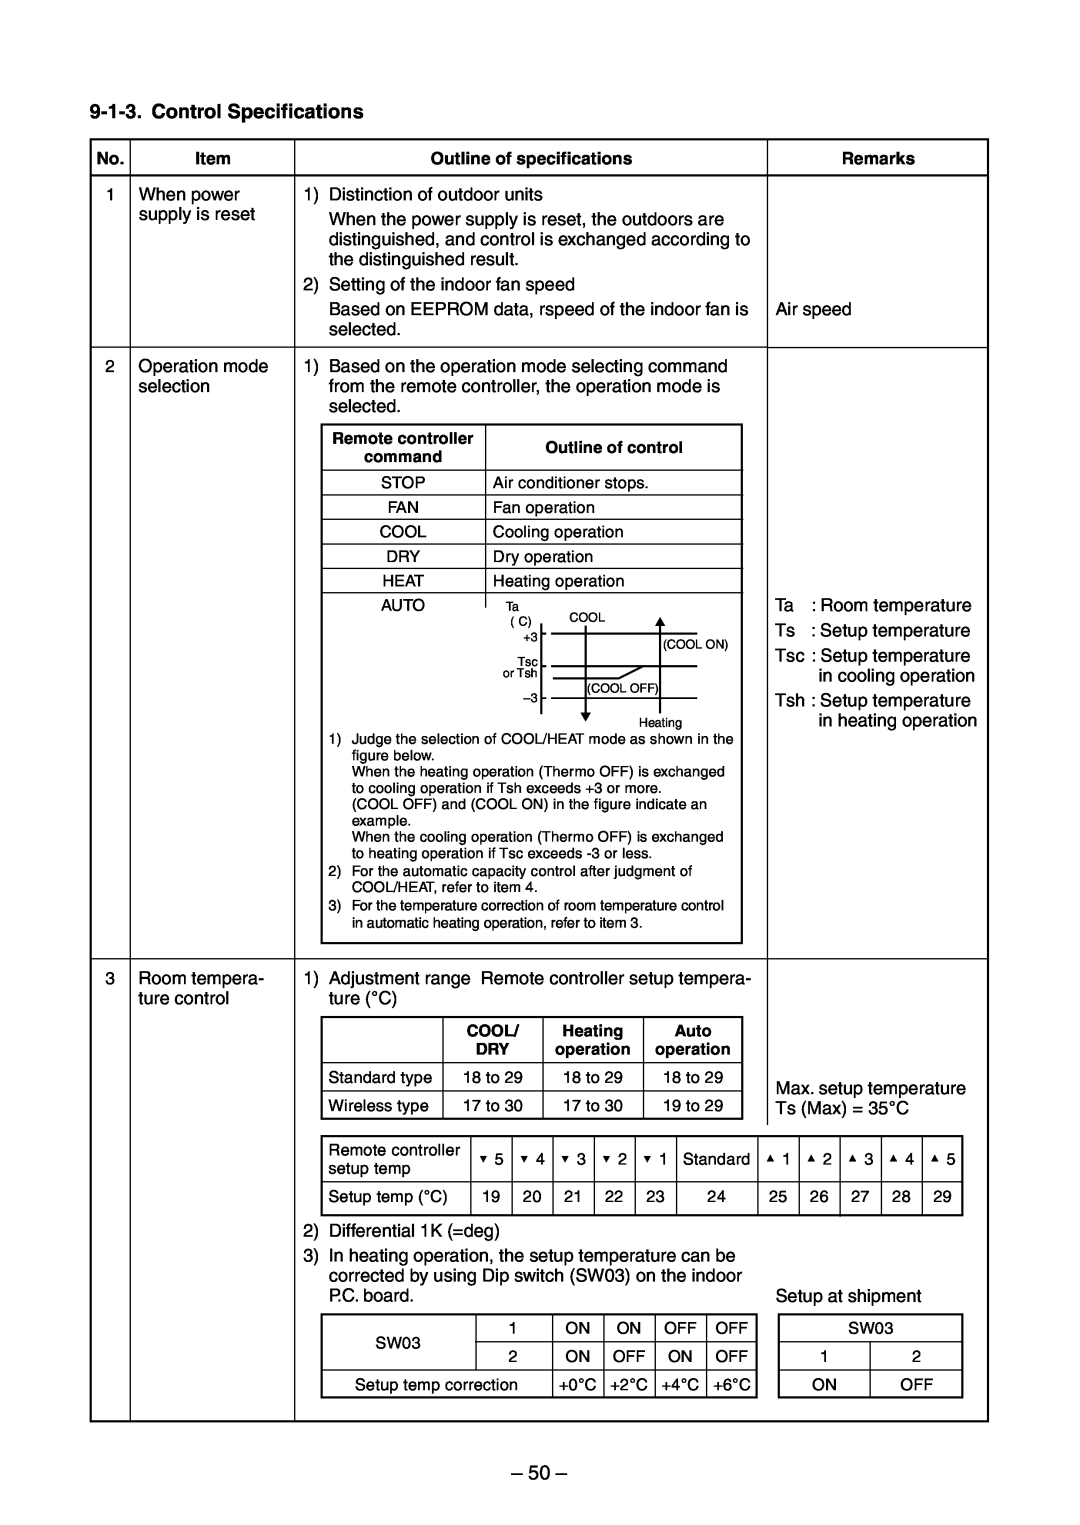 Toshiba RAV-SM560UT-E, RAV-SM800AT-E, RAV-SM800UT-E service manual Control Specifications, Outline of specifications, Remarks 